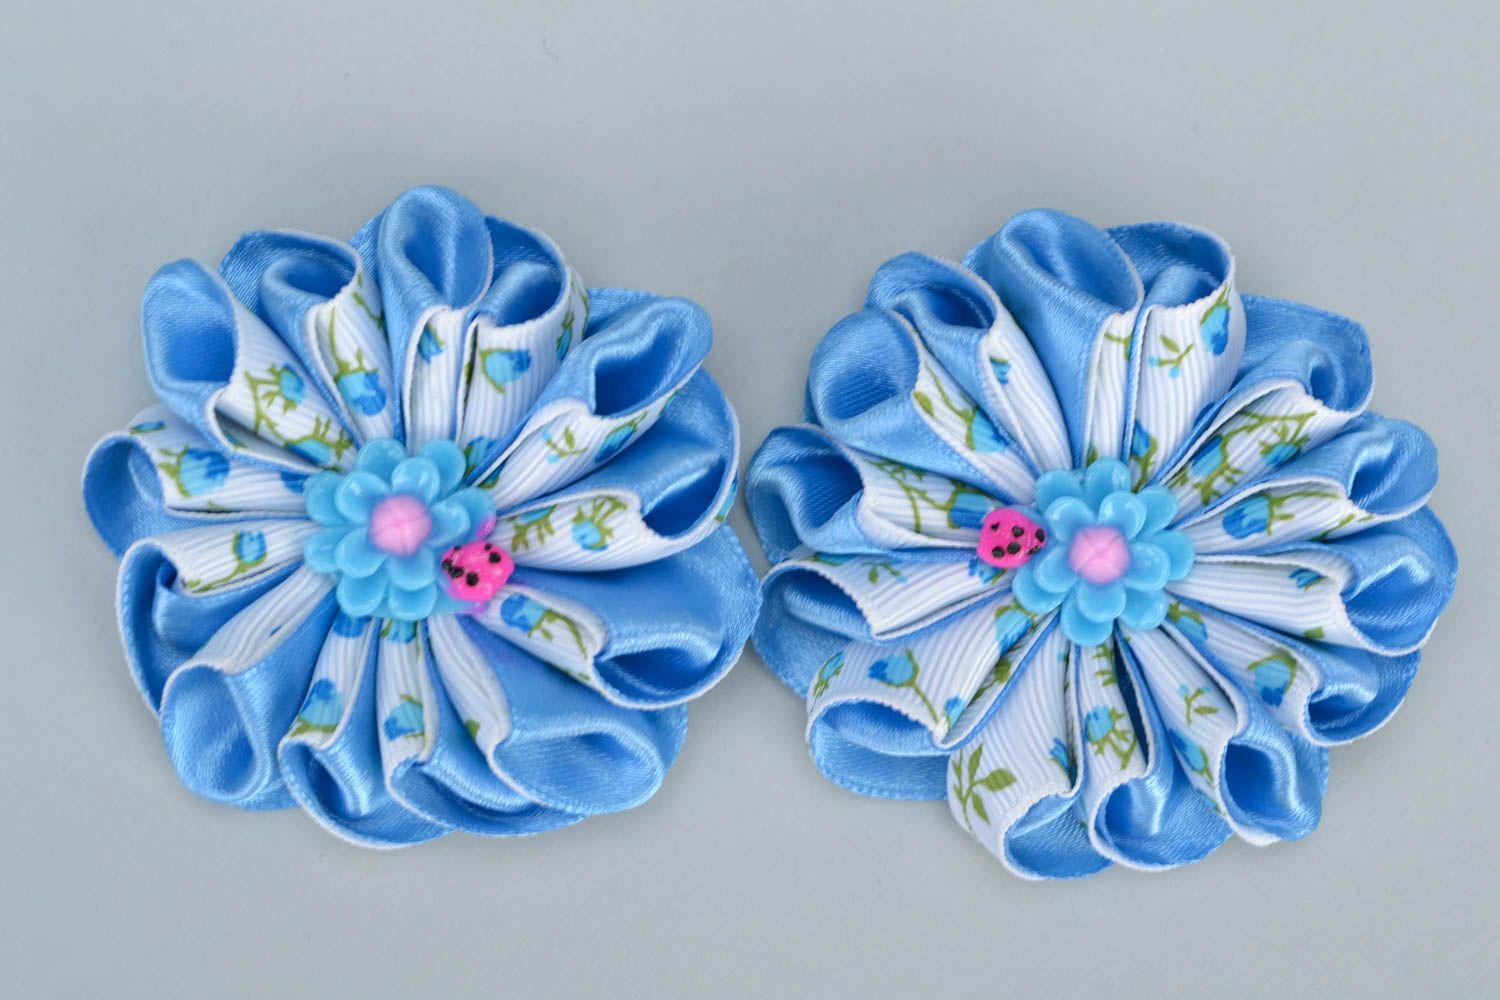 Handmade beautiful scrunchies with flowers made using kanzashi technique set of 2 pieces photo 3